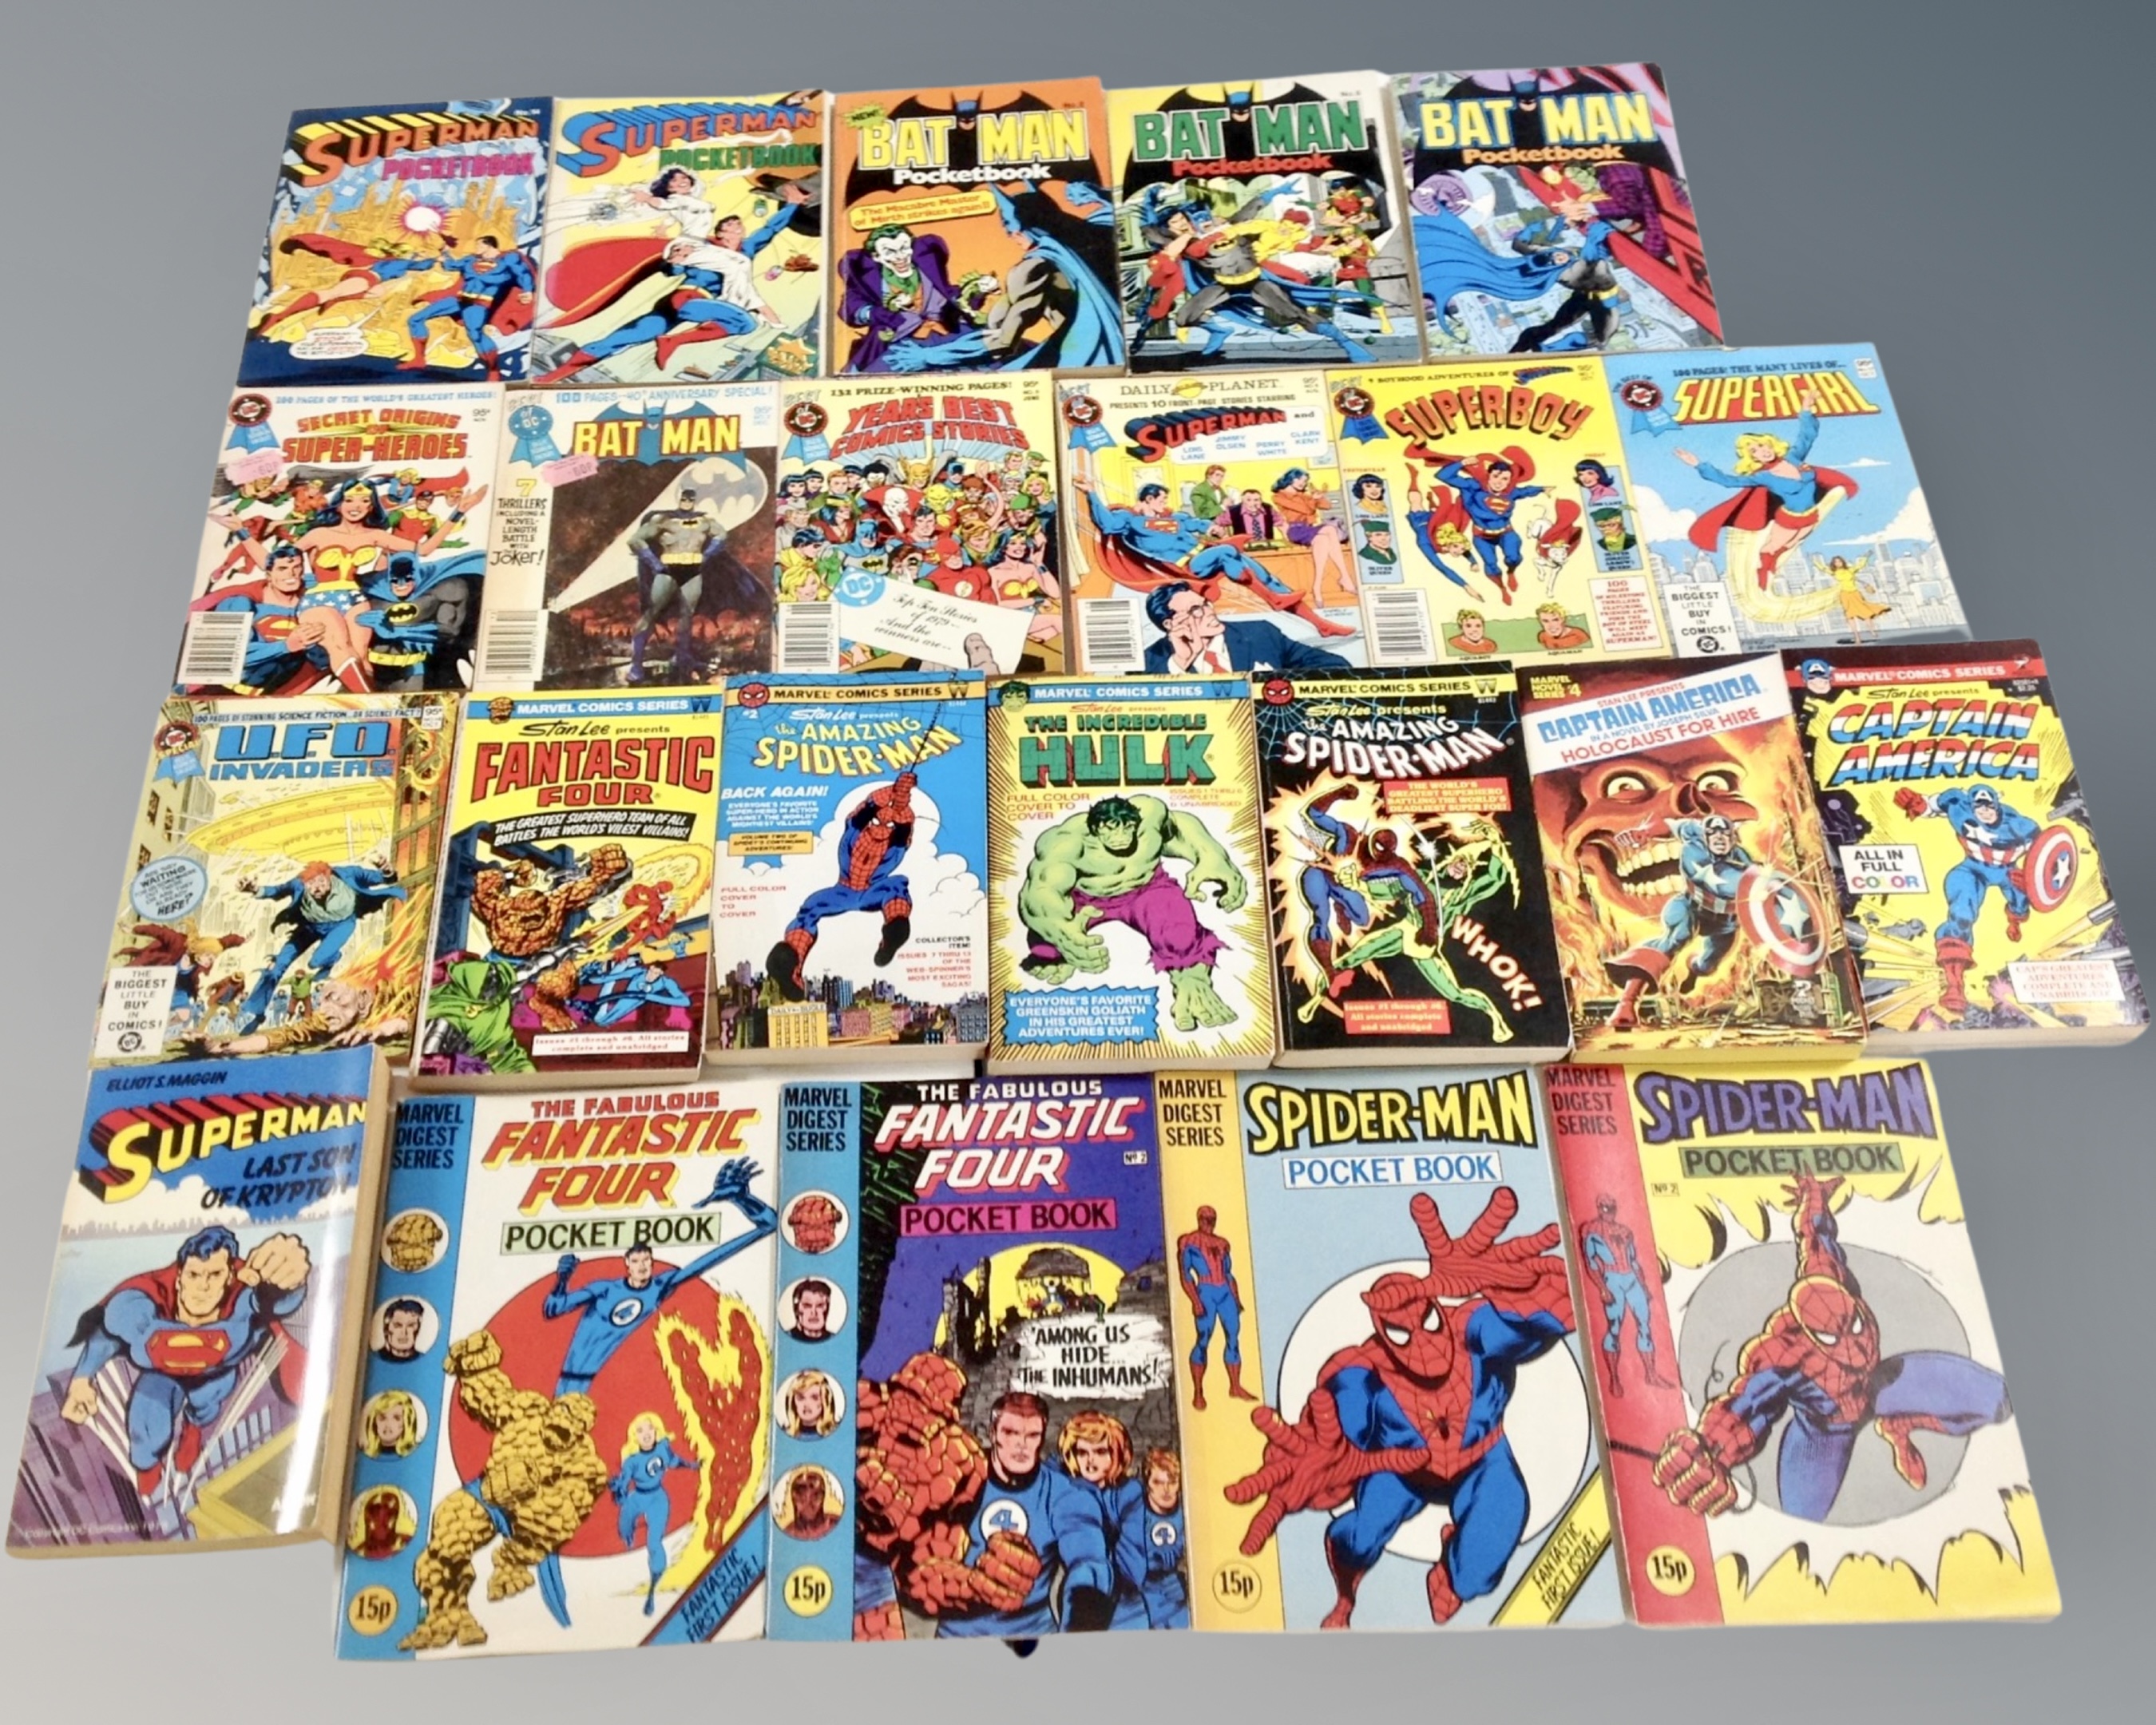 A box containing assorted Marvel and DC pocket books, Marvel digests and over size comics.